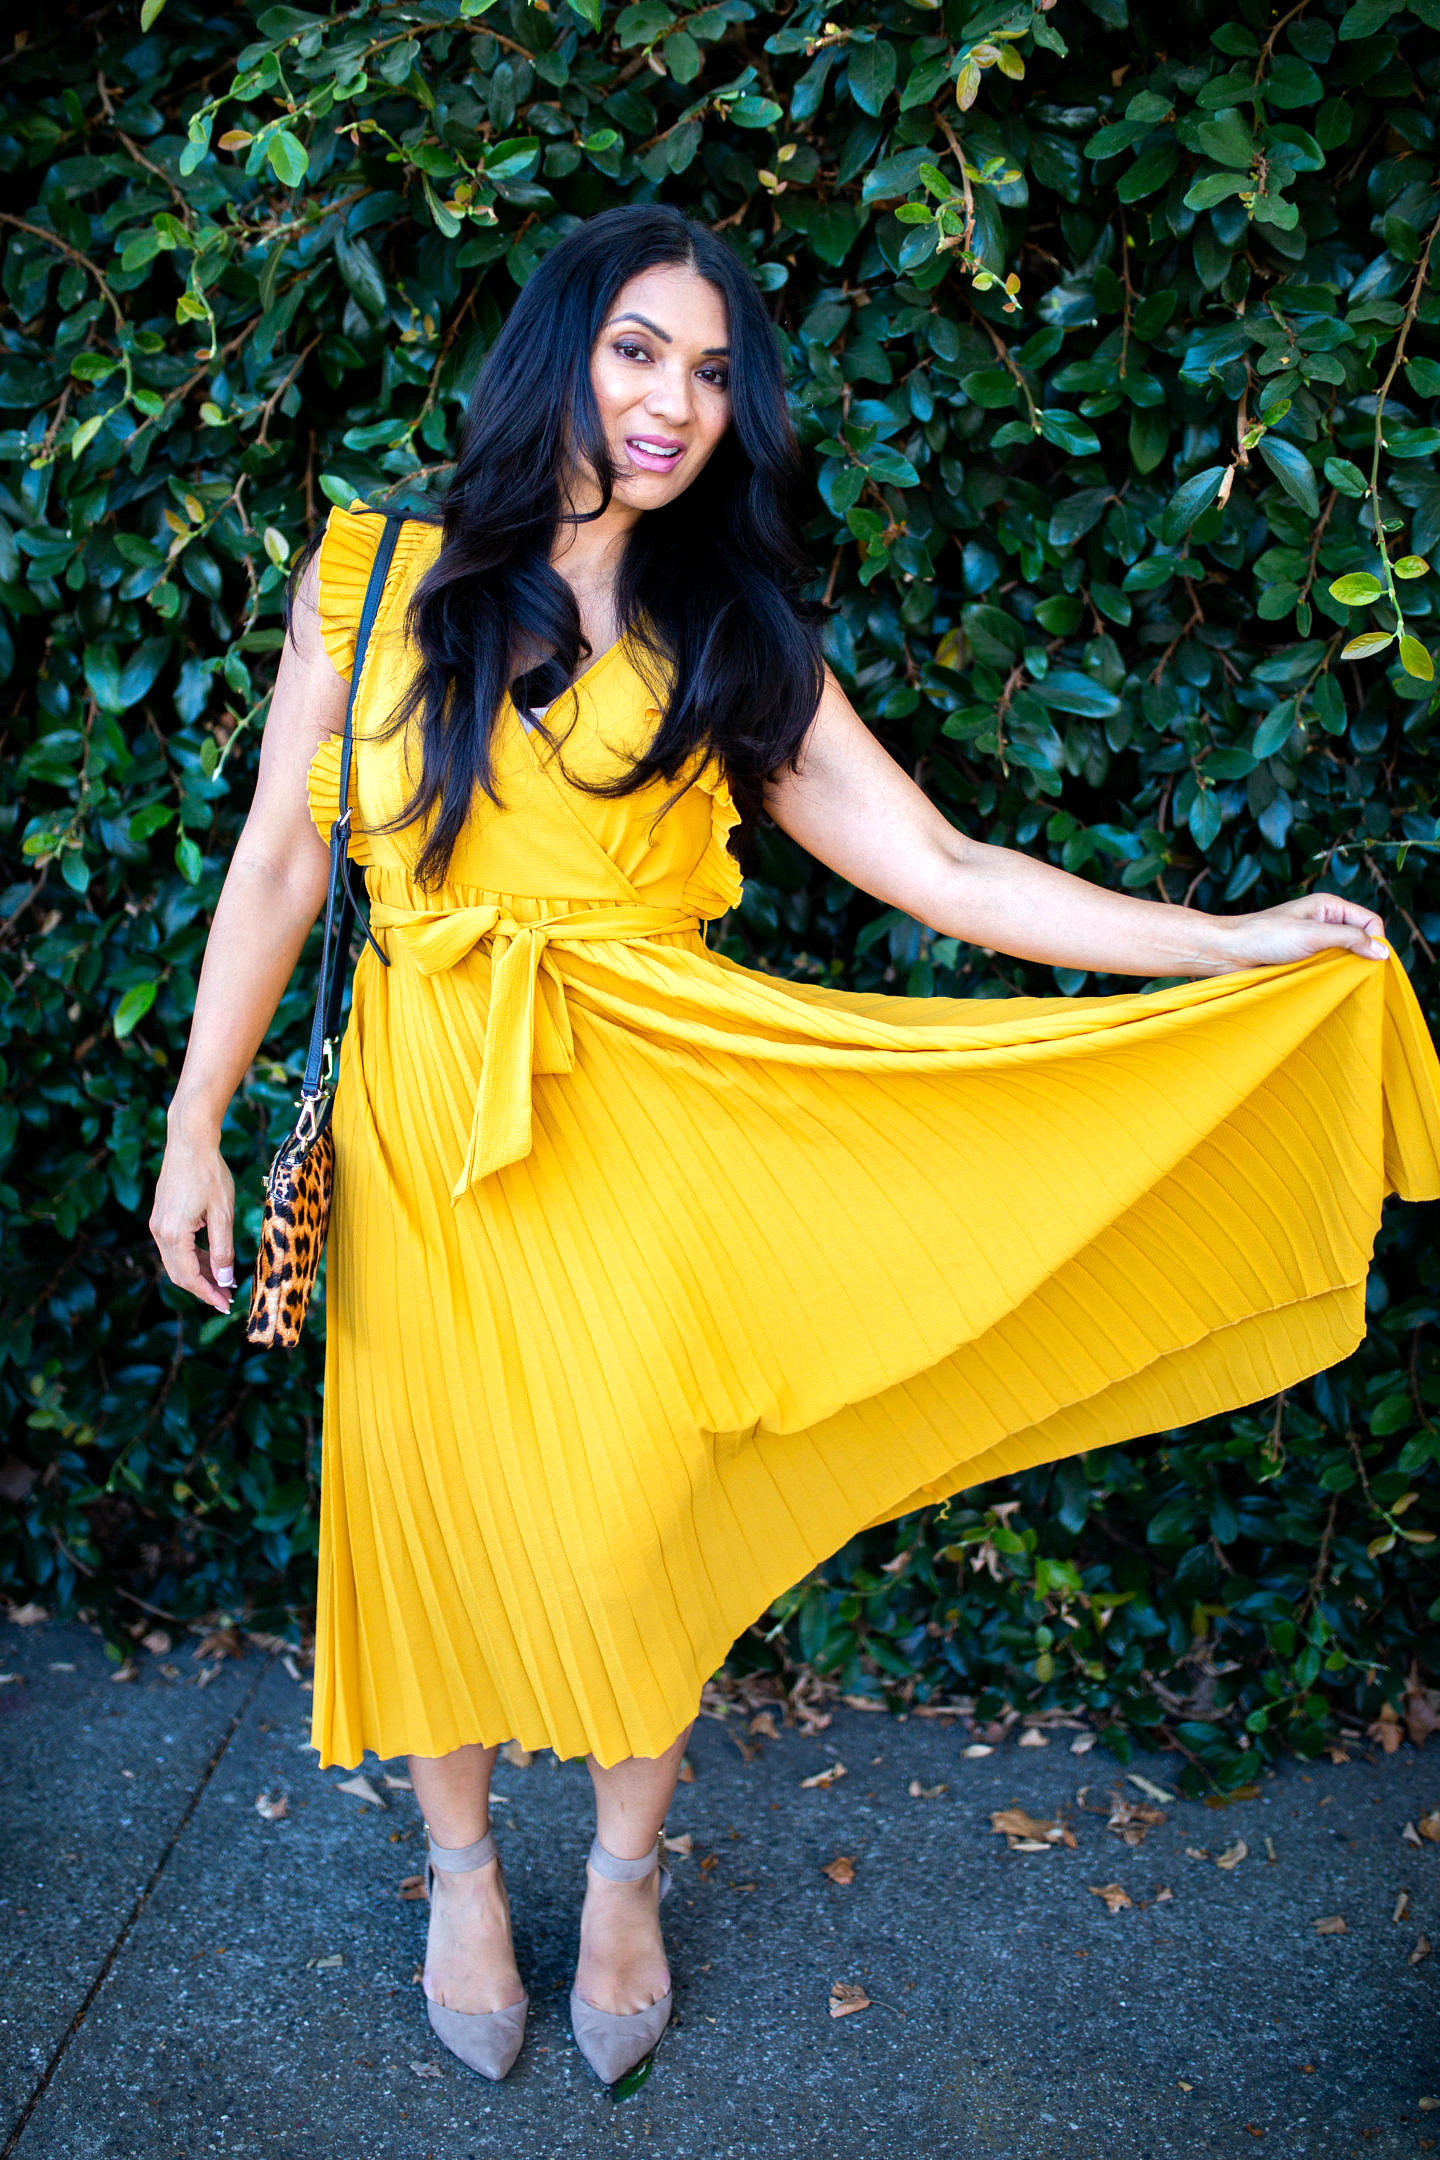 Curious how to incorporate a yellow pleated dress into your wardrobe? Orange County Blogger Debbie Savage is sharing her favorite way to style a yellow pleated dress here!